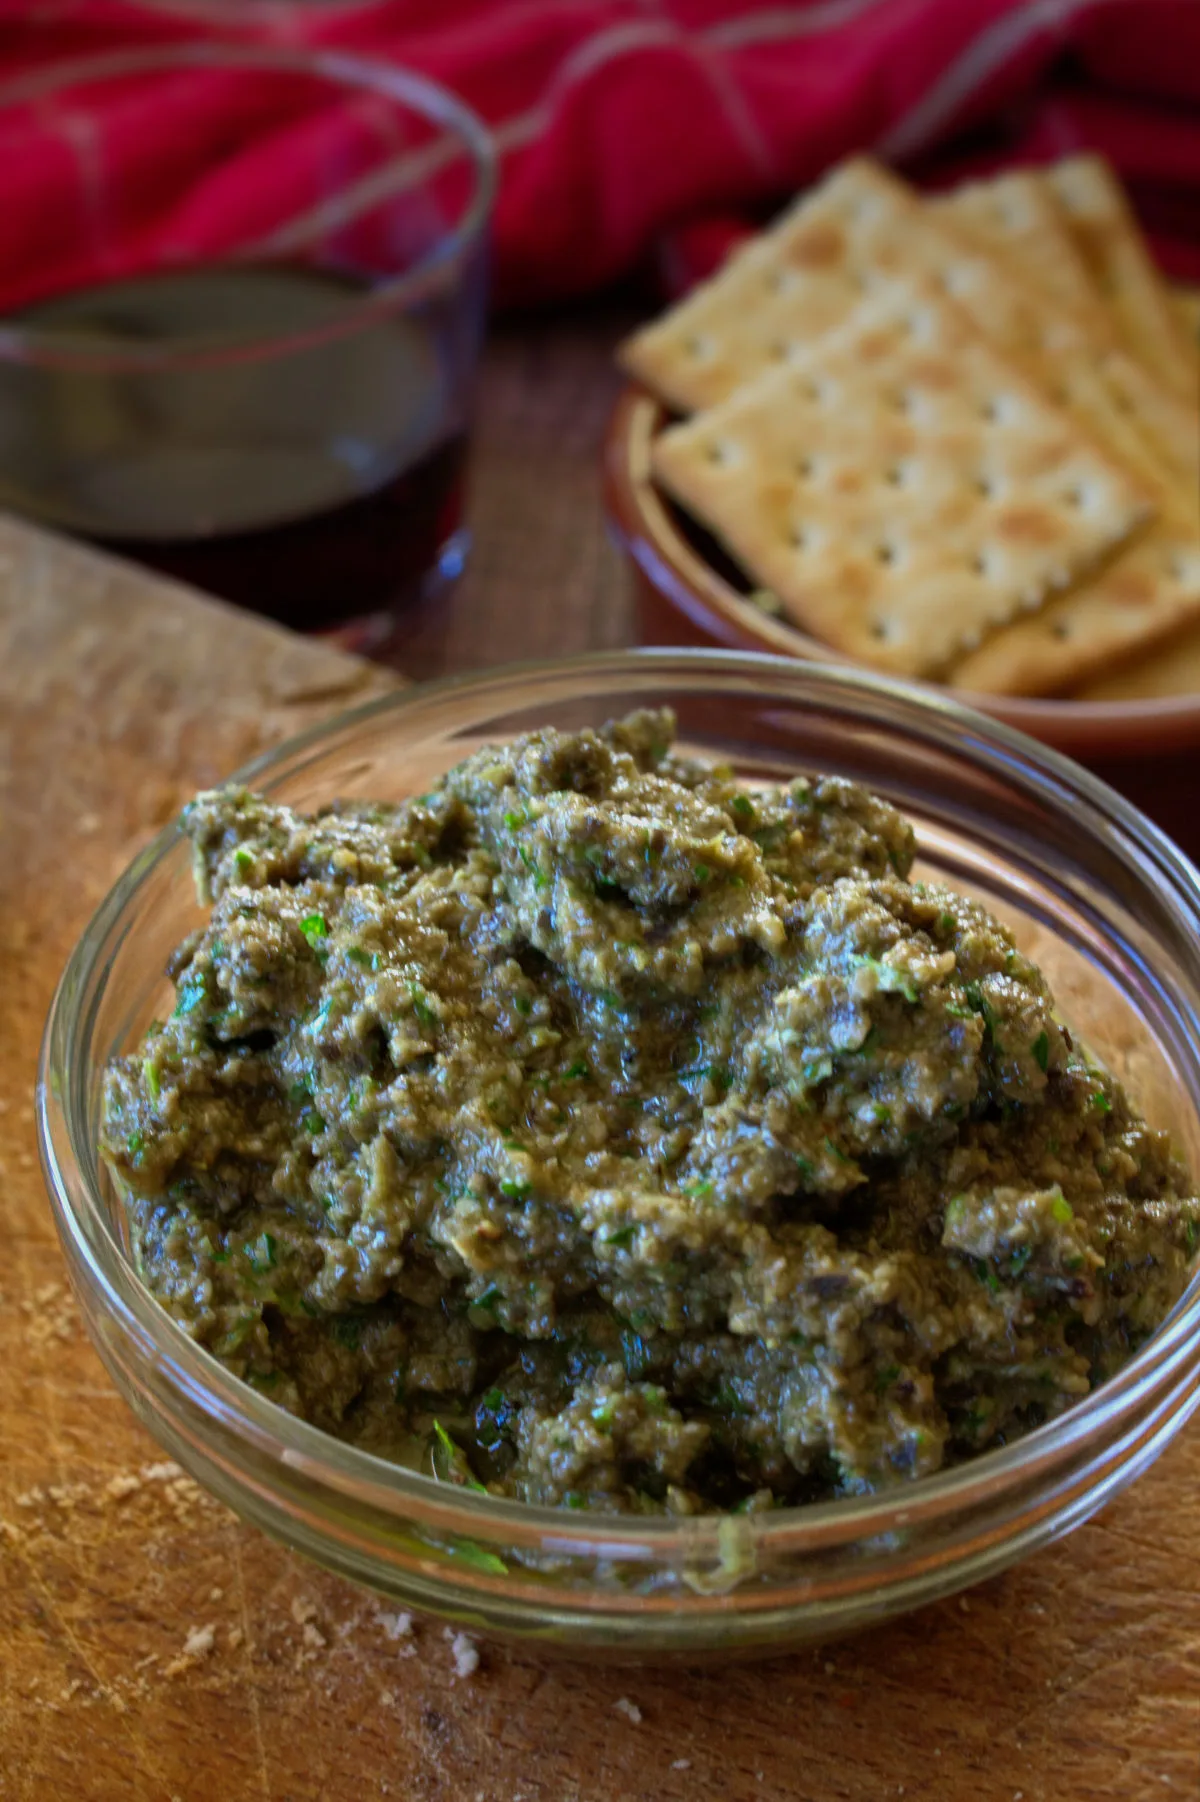 A bowl of Olive tapenade sits beside some crackers.